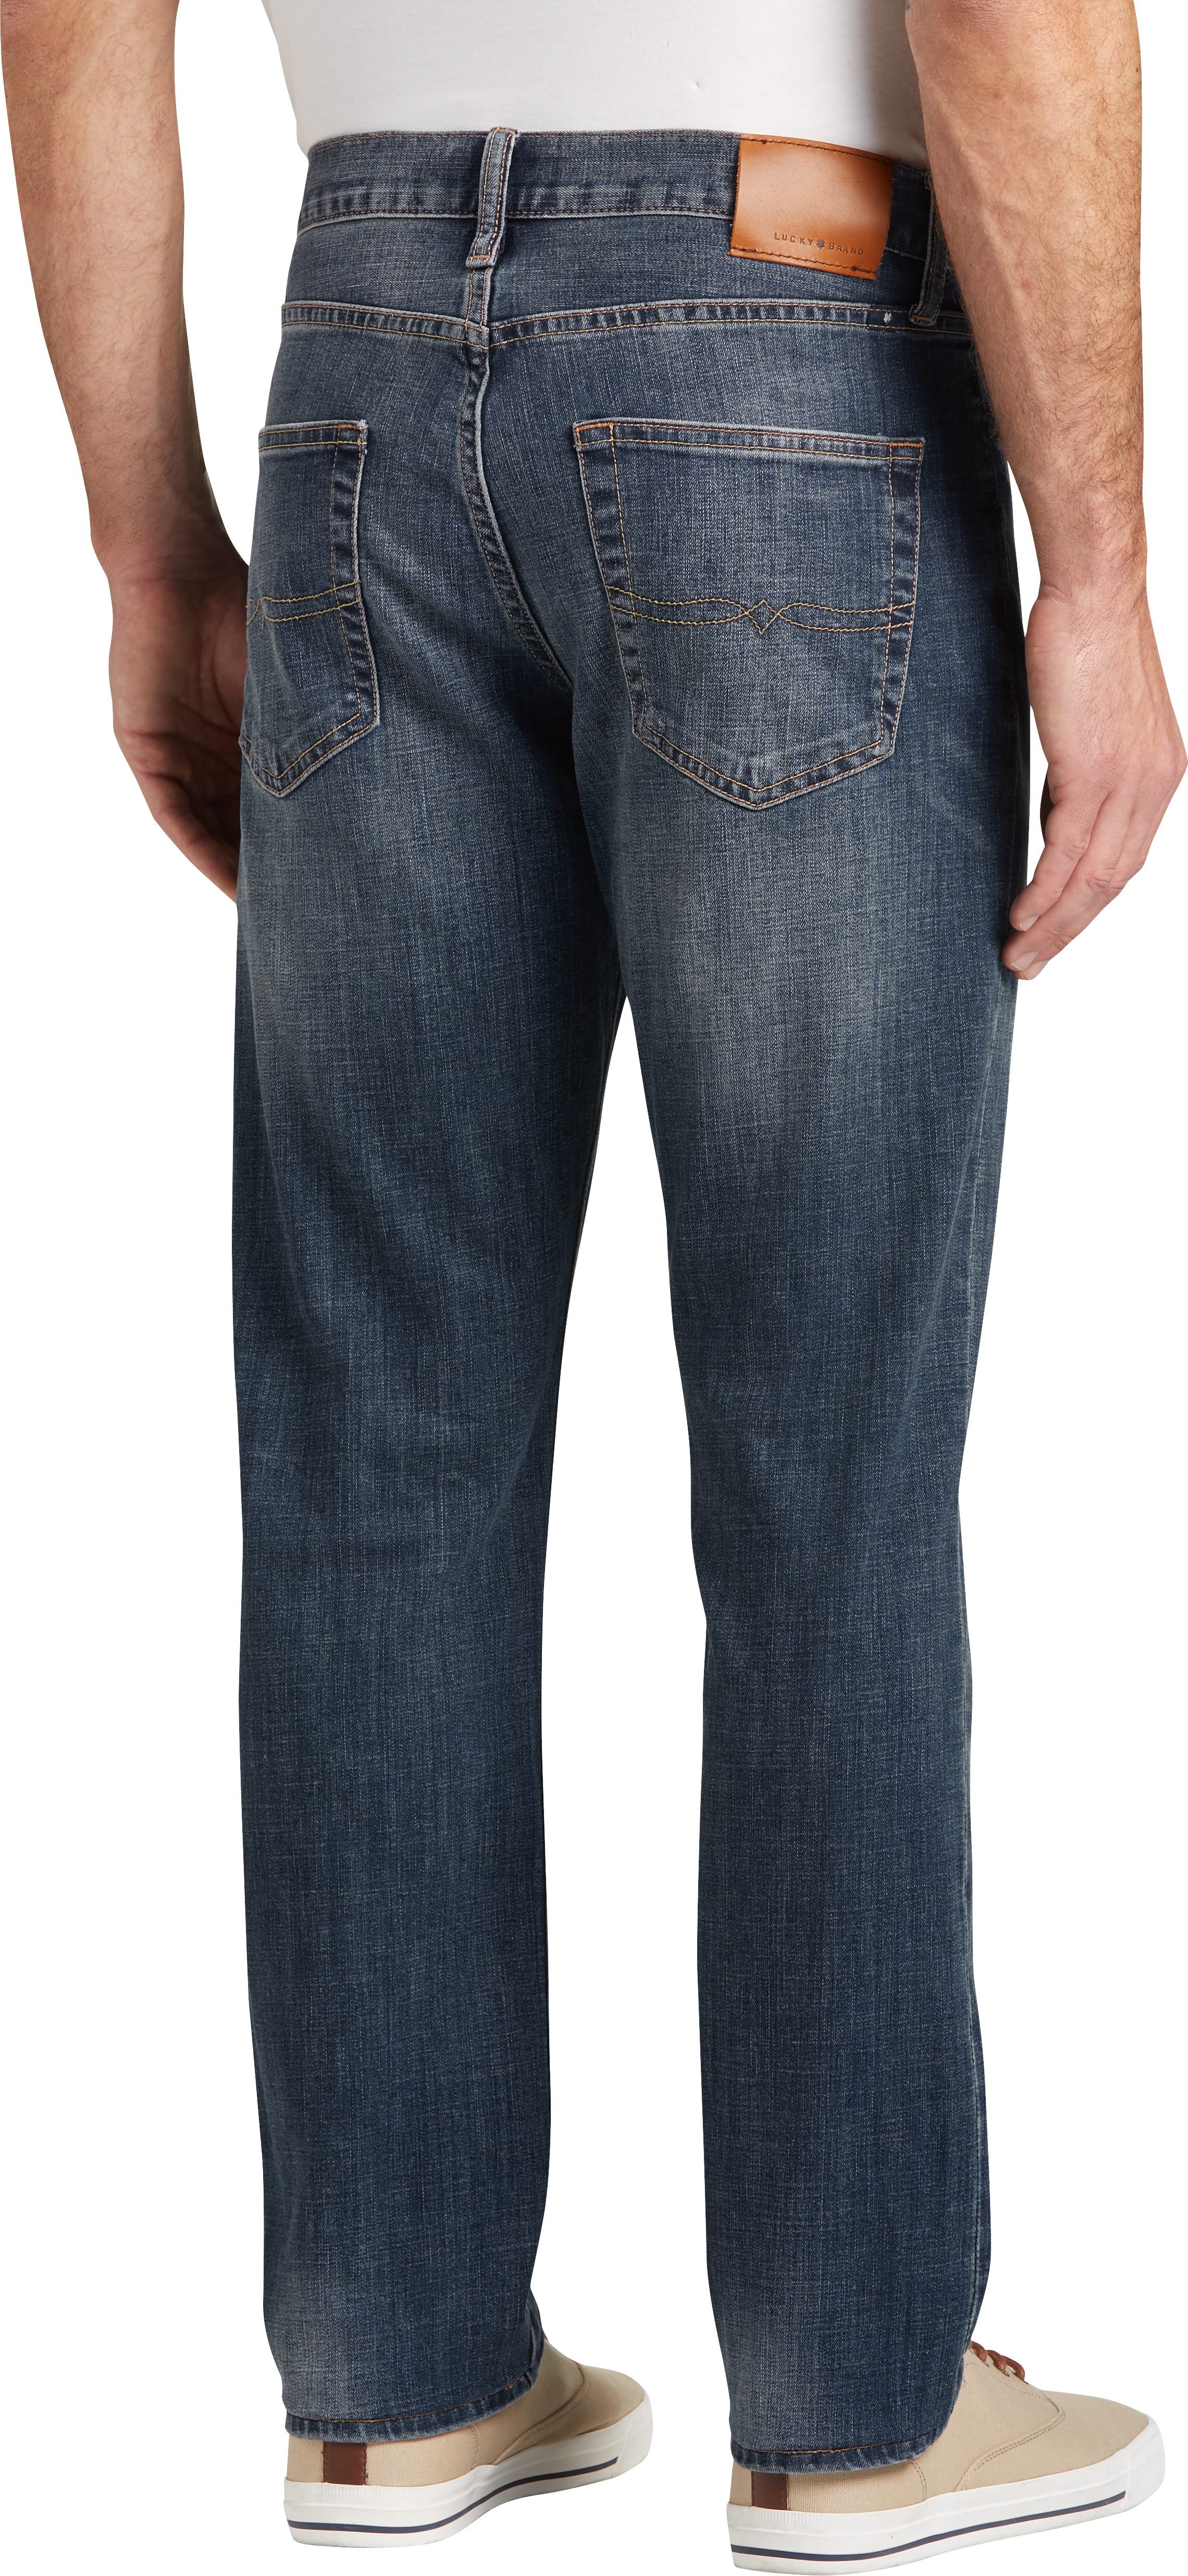 410 Arched Rock Athletic Fit Jeans